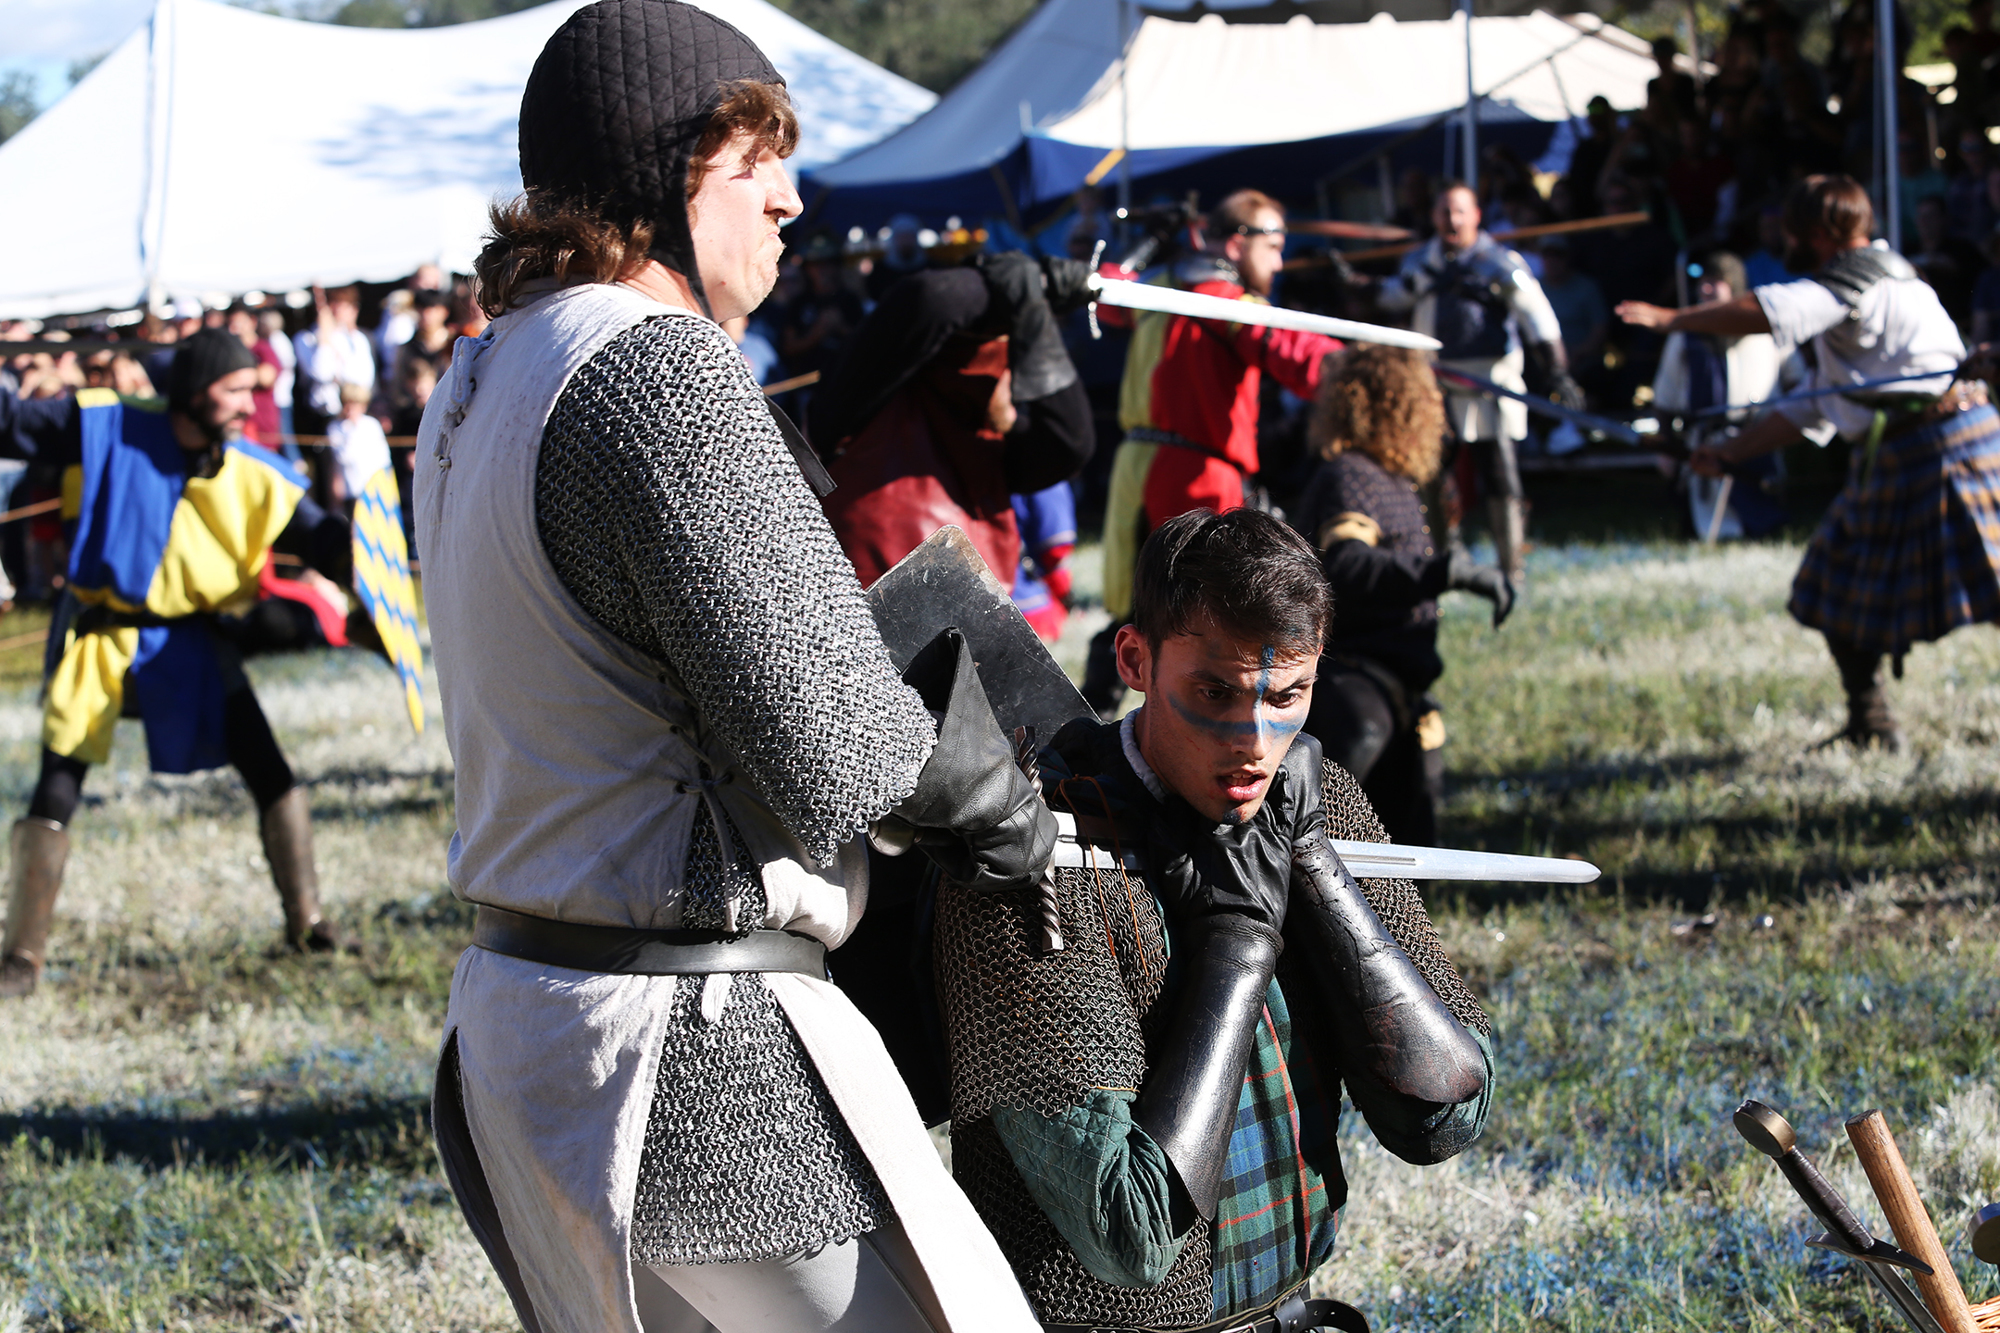 Human Combat Chess fighters really go for it at the 2021 Sarasota Medieval Fair. (File photo)